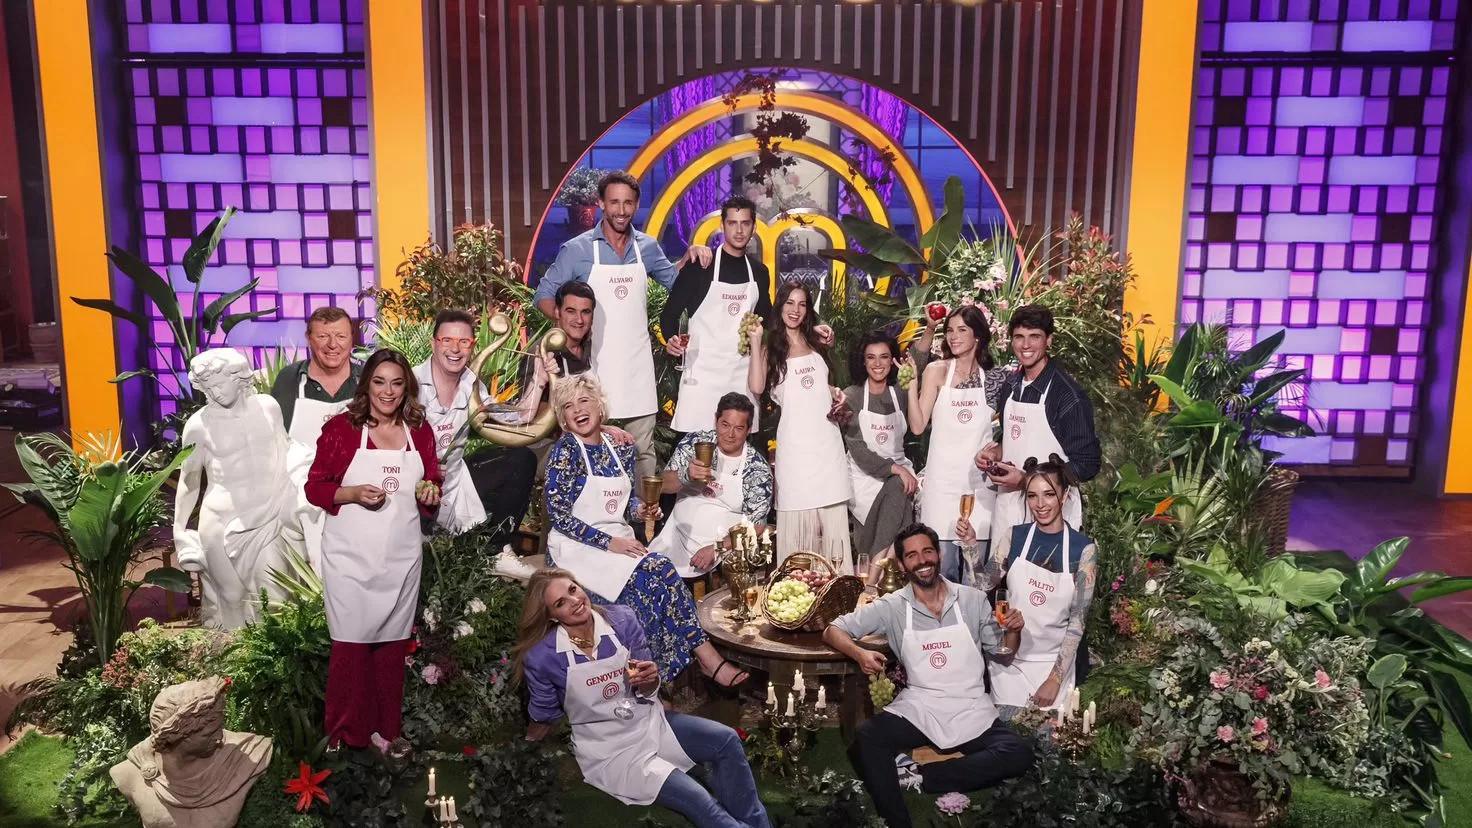 How much prize does the winner of MasterChef Celebrity 8 get?
